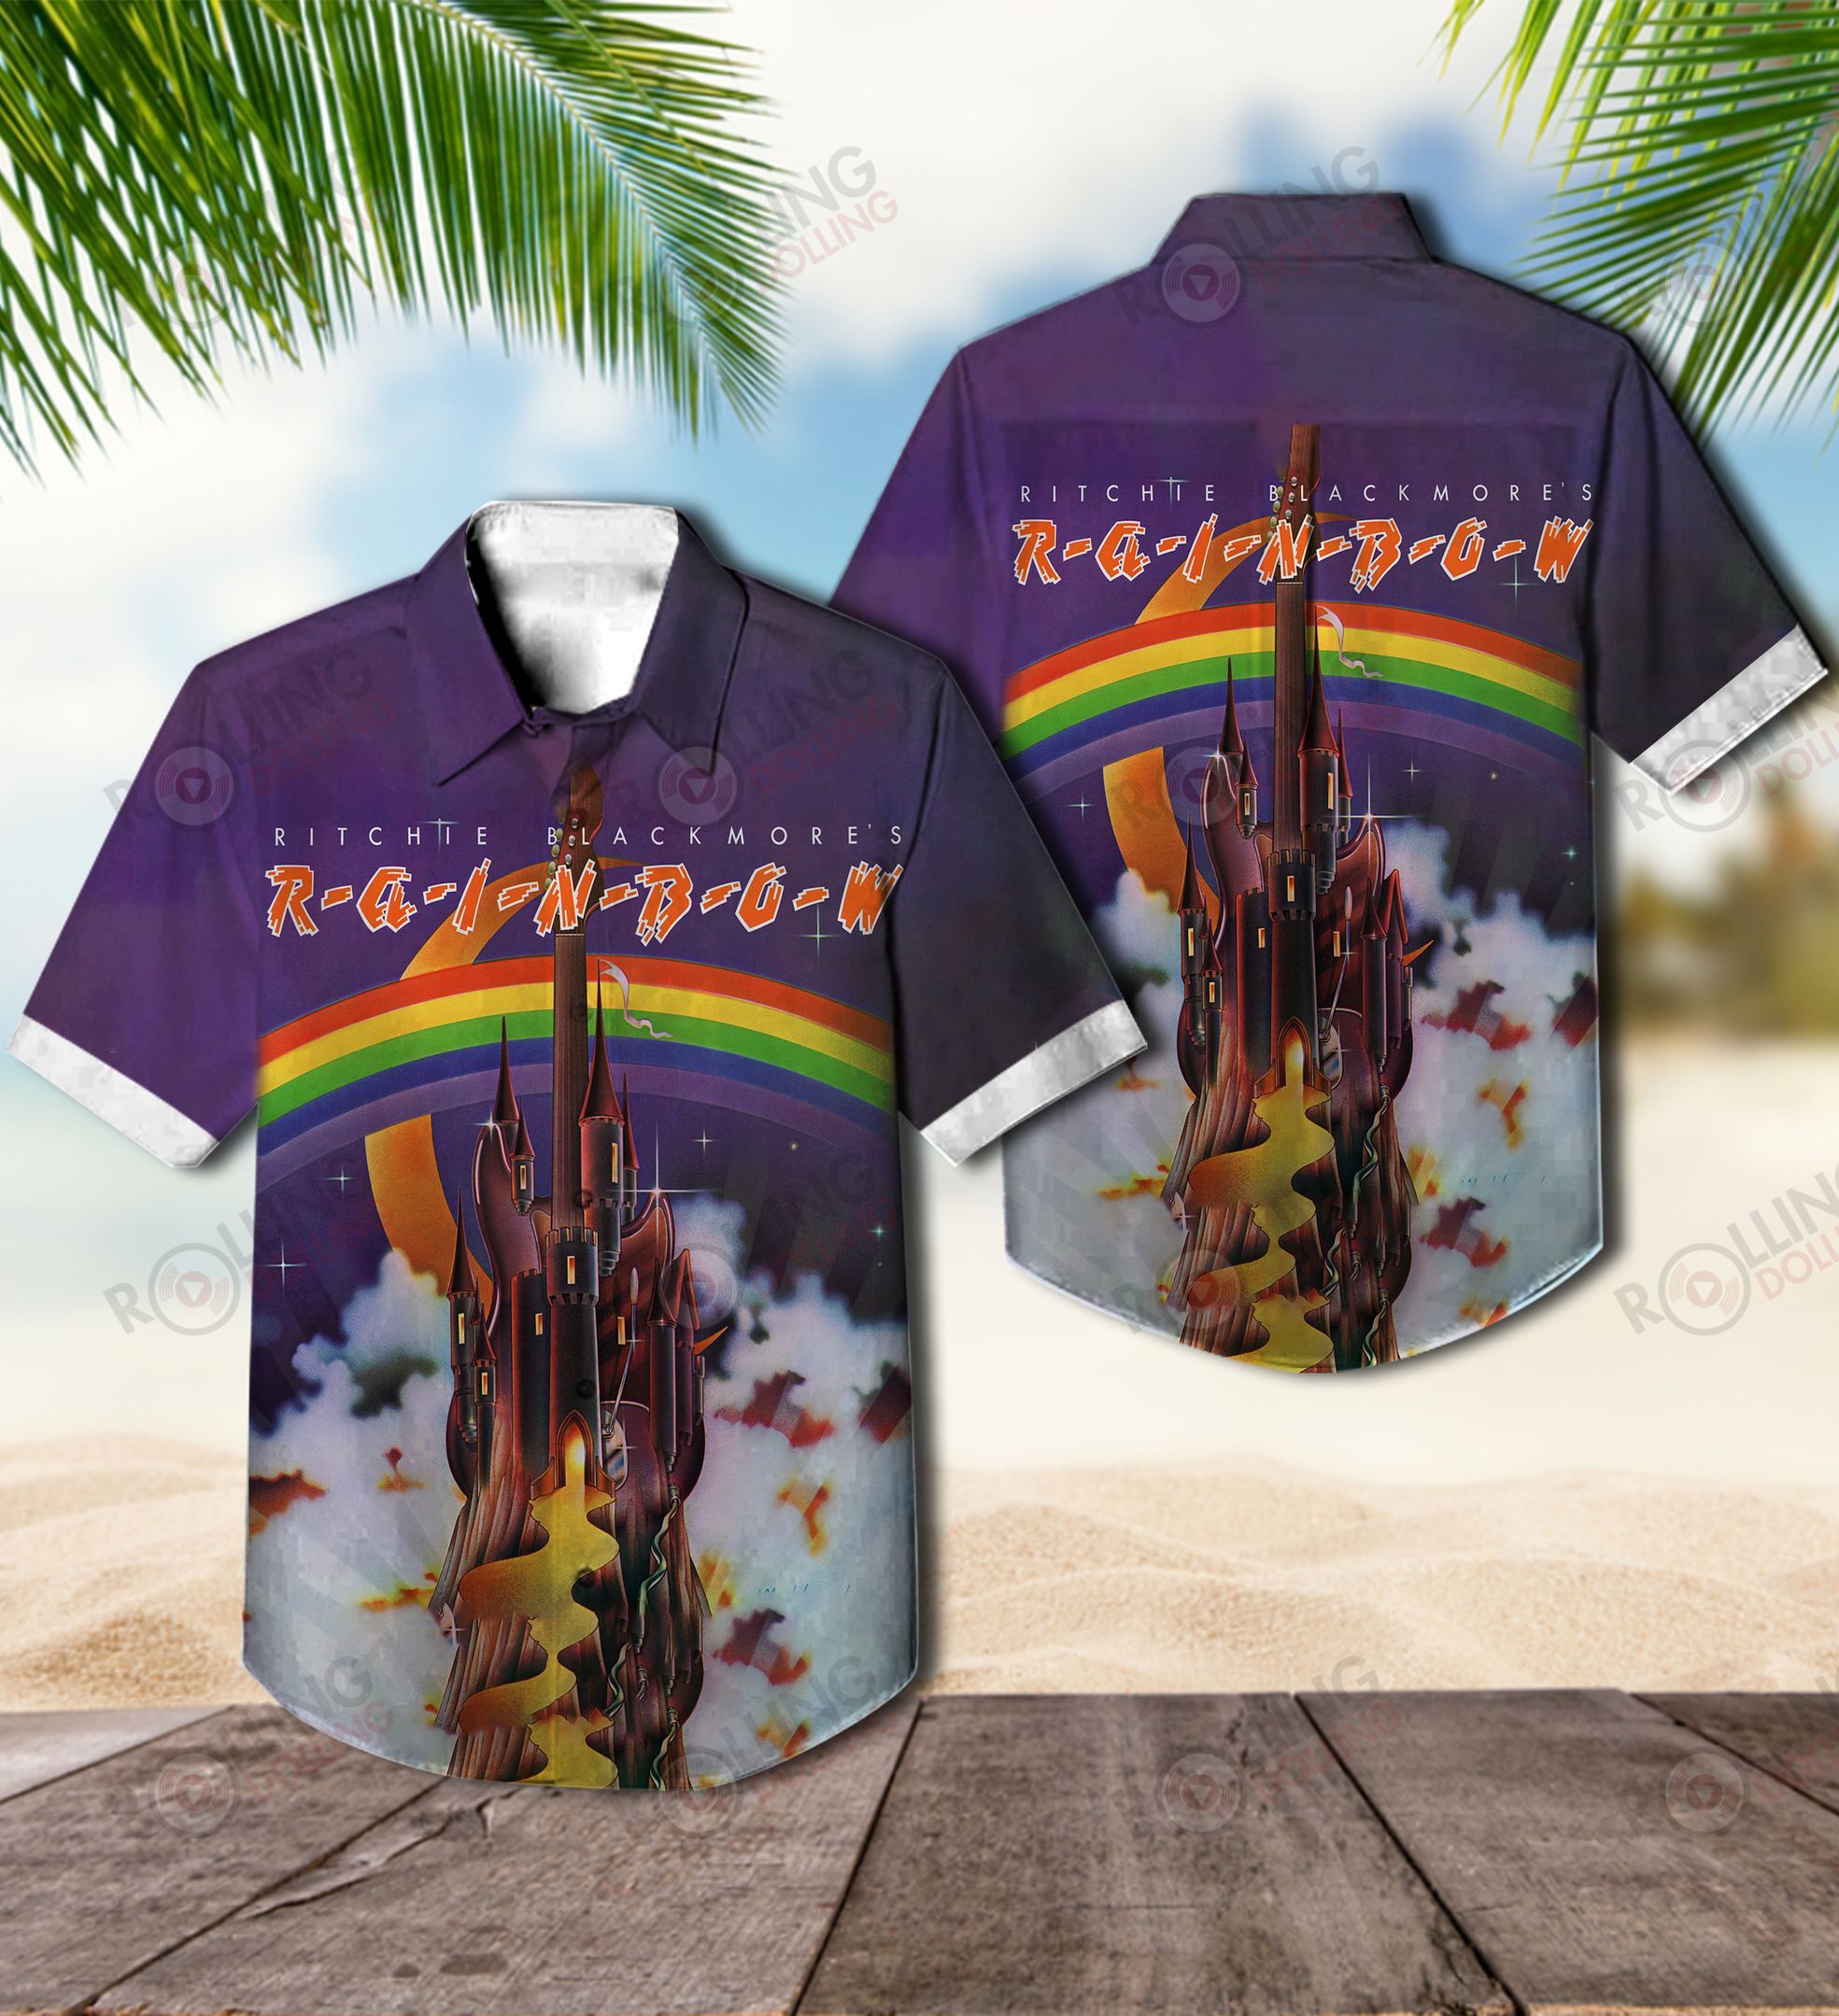 This Hawaiian shirt is an excellent choice if you go on vacation 125